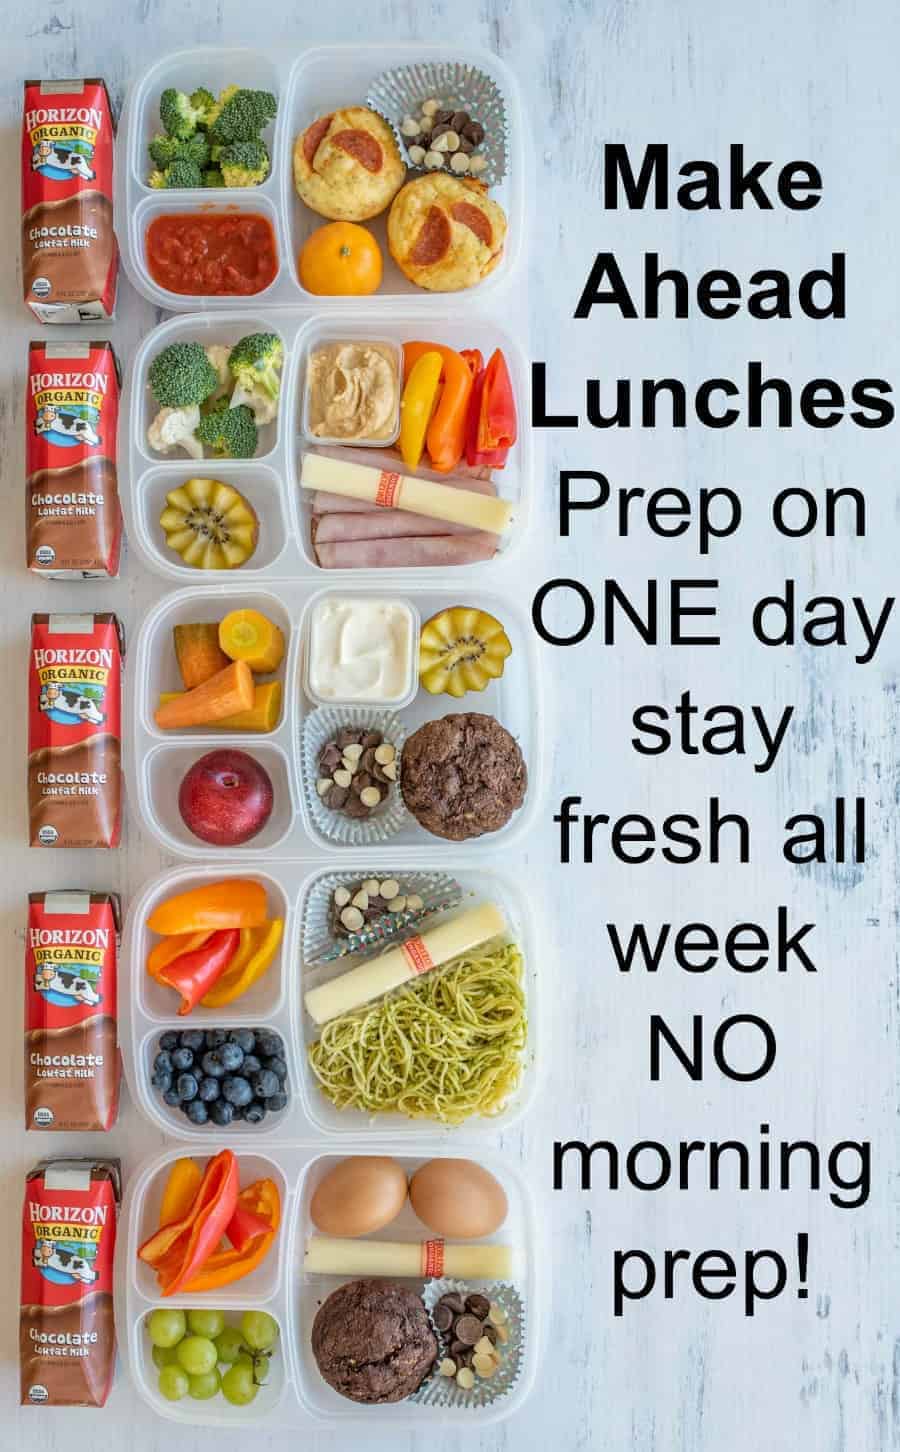 A Week of School Lunch Ideas with Rubbermaid LunchBlox